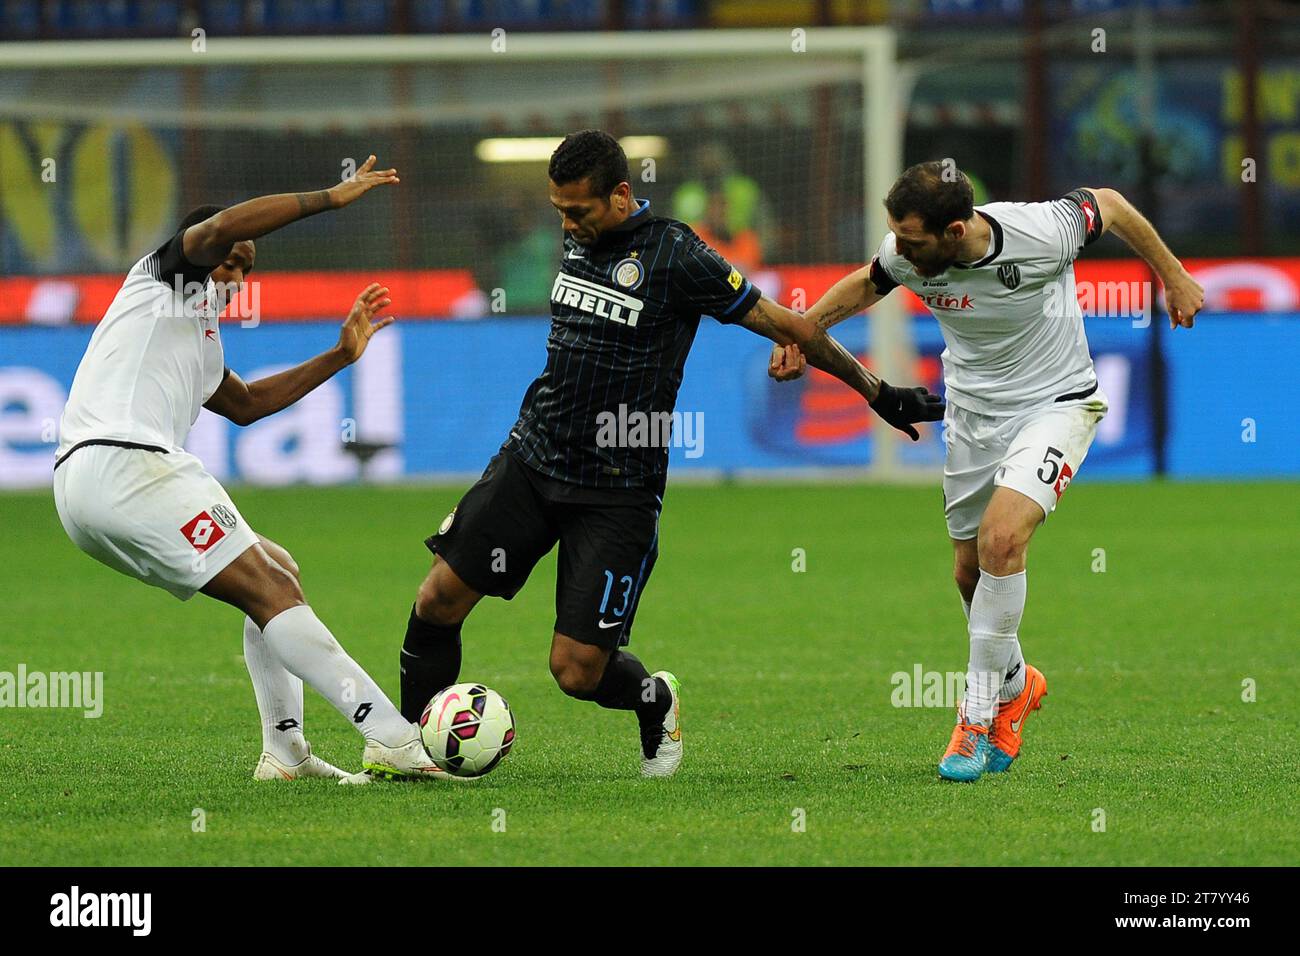 Fredy Guarin of FC Inter Milan challenges for the ball among Carlos Carbonero and Luigi Giorgi of AC Cesena during the italian championship Serie A football match between FC Internazionale and AC Cesena on March 15, 2015 at Giuseppe Meazza Stadium in Milan, Italy. Photo Massimo Cebrelli / DPPI Stock Photo